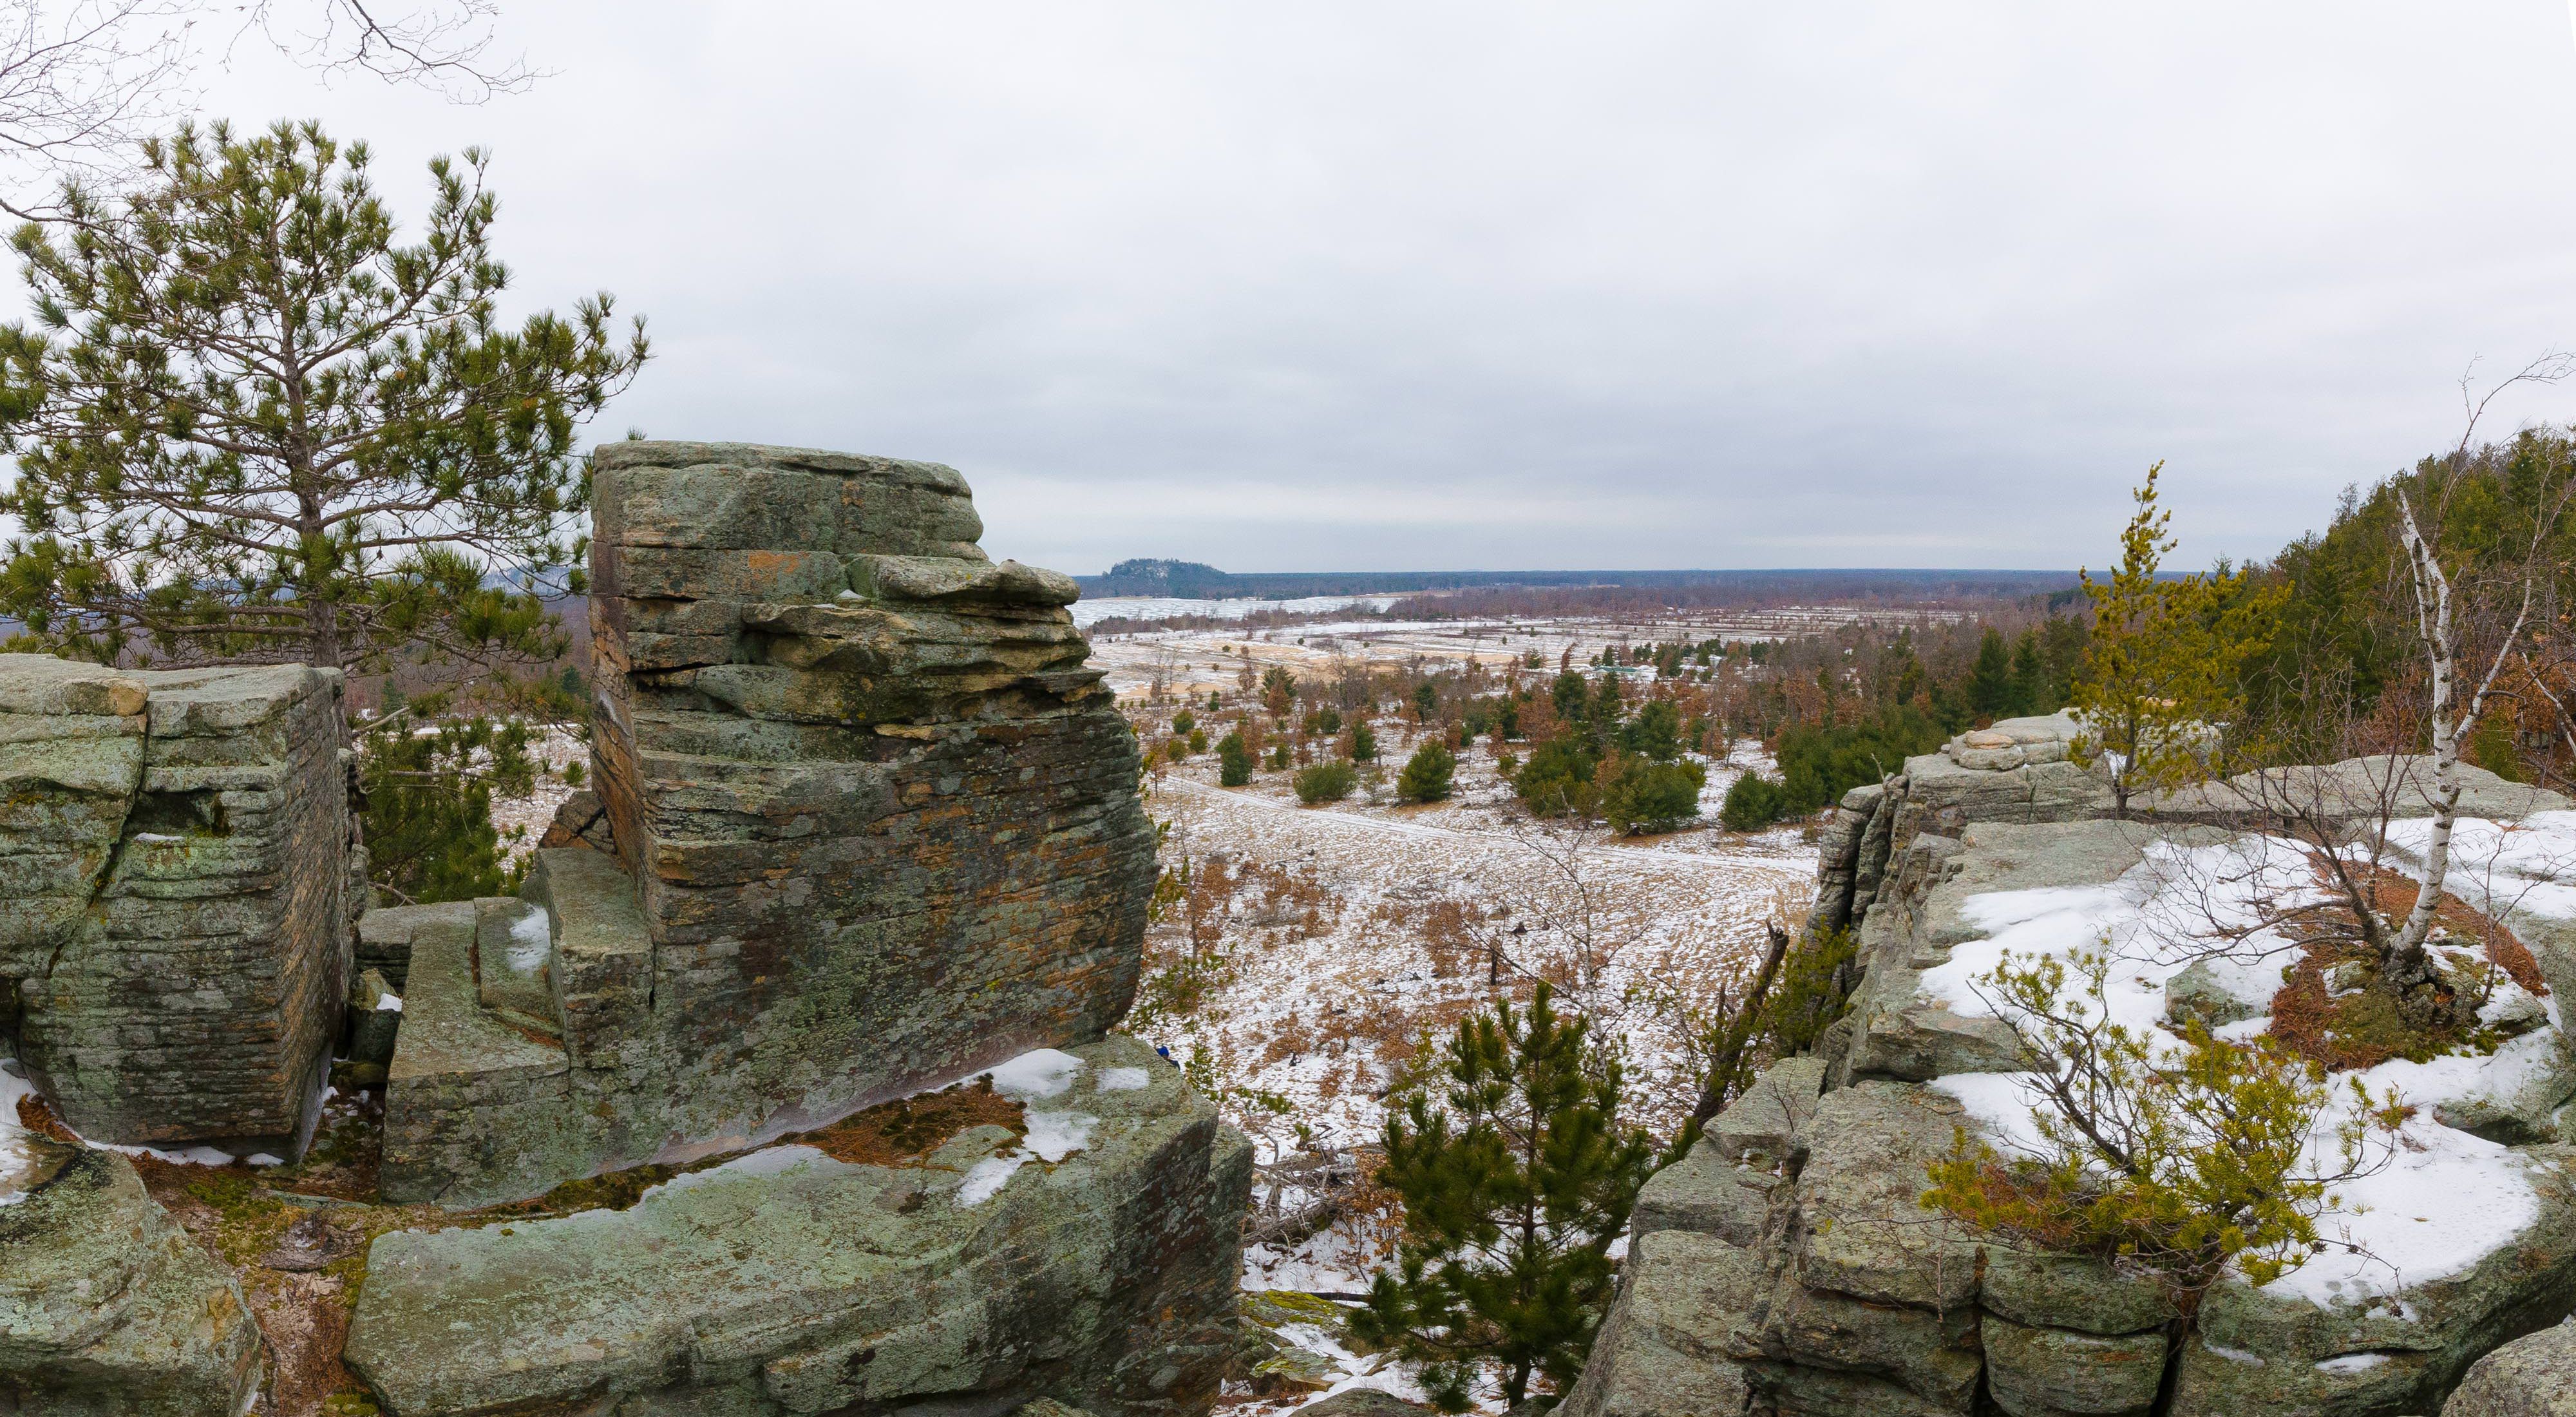 Panoramic view over the wintry landscape from the rocky, snow-covered bluffs dotted with birch and conifer trees at the Quincy Buff and Wetlands State Natural Area.